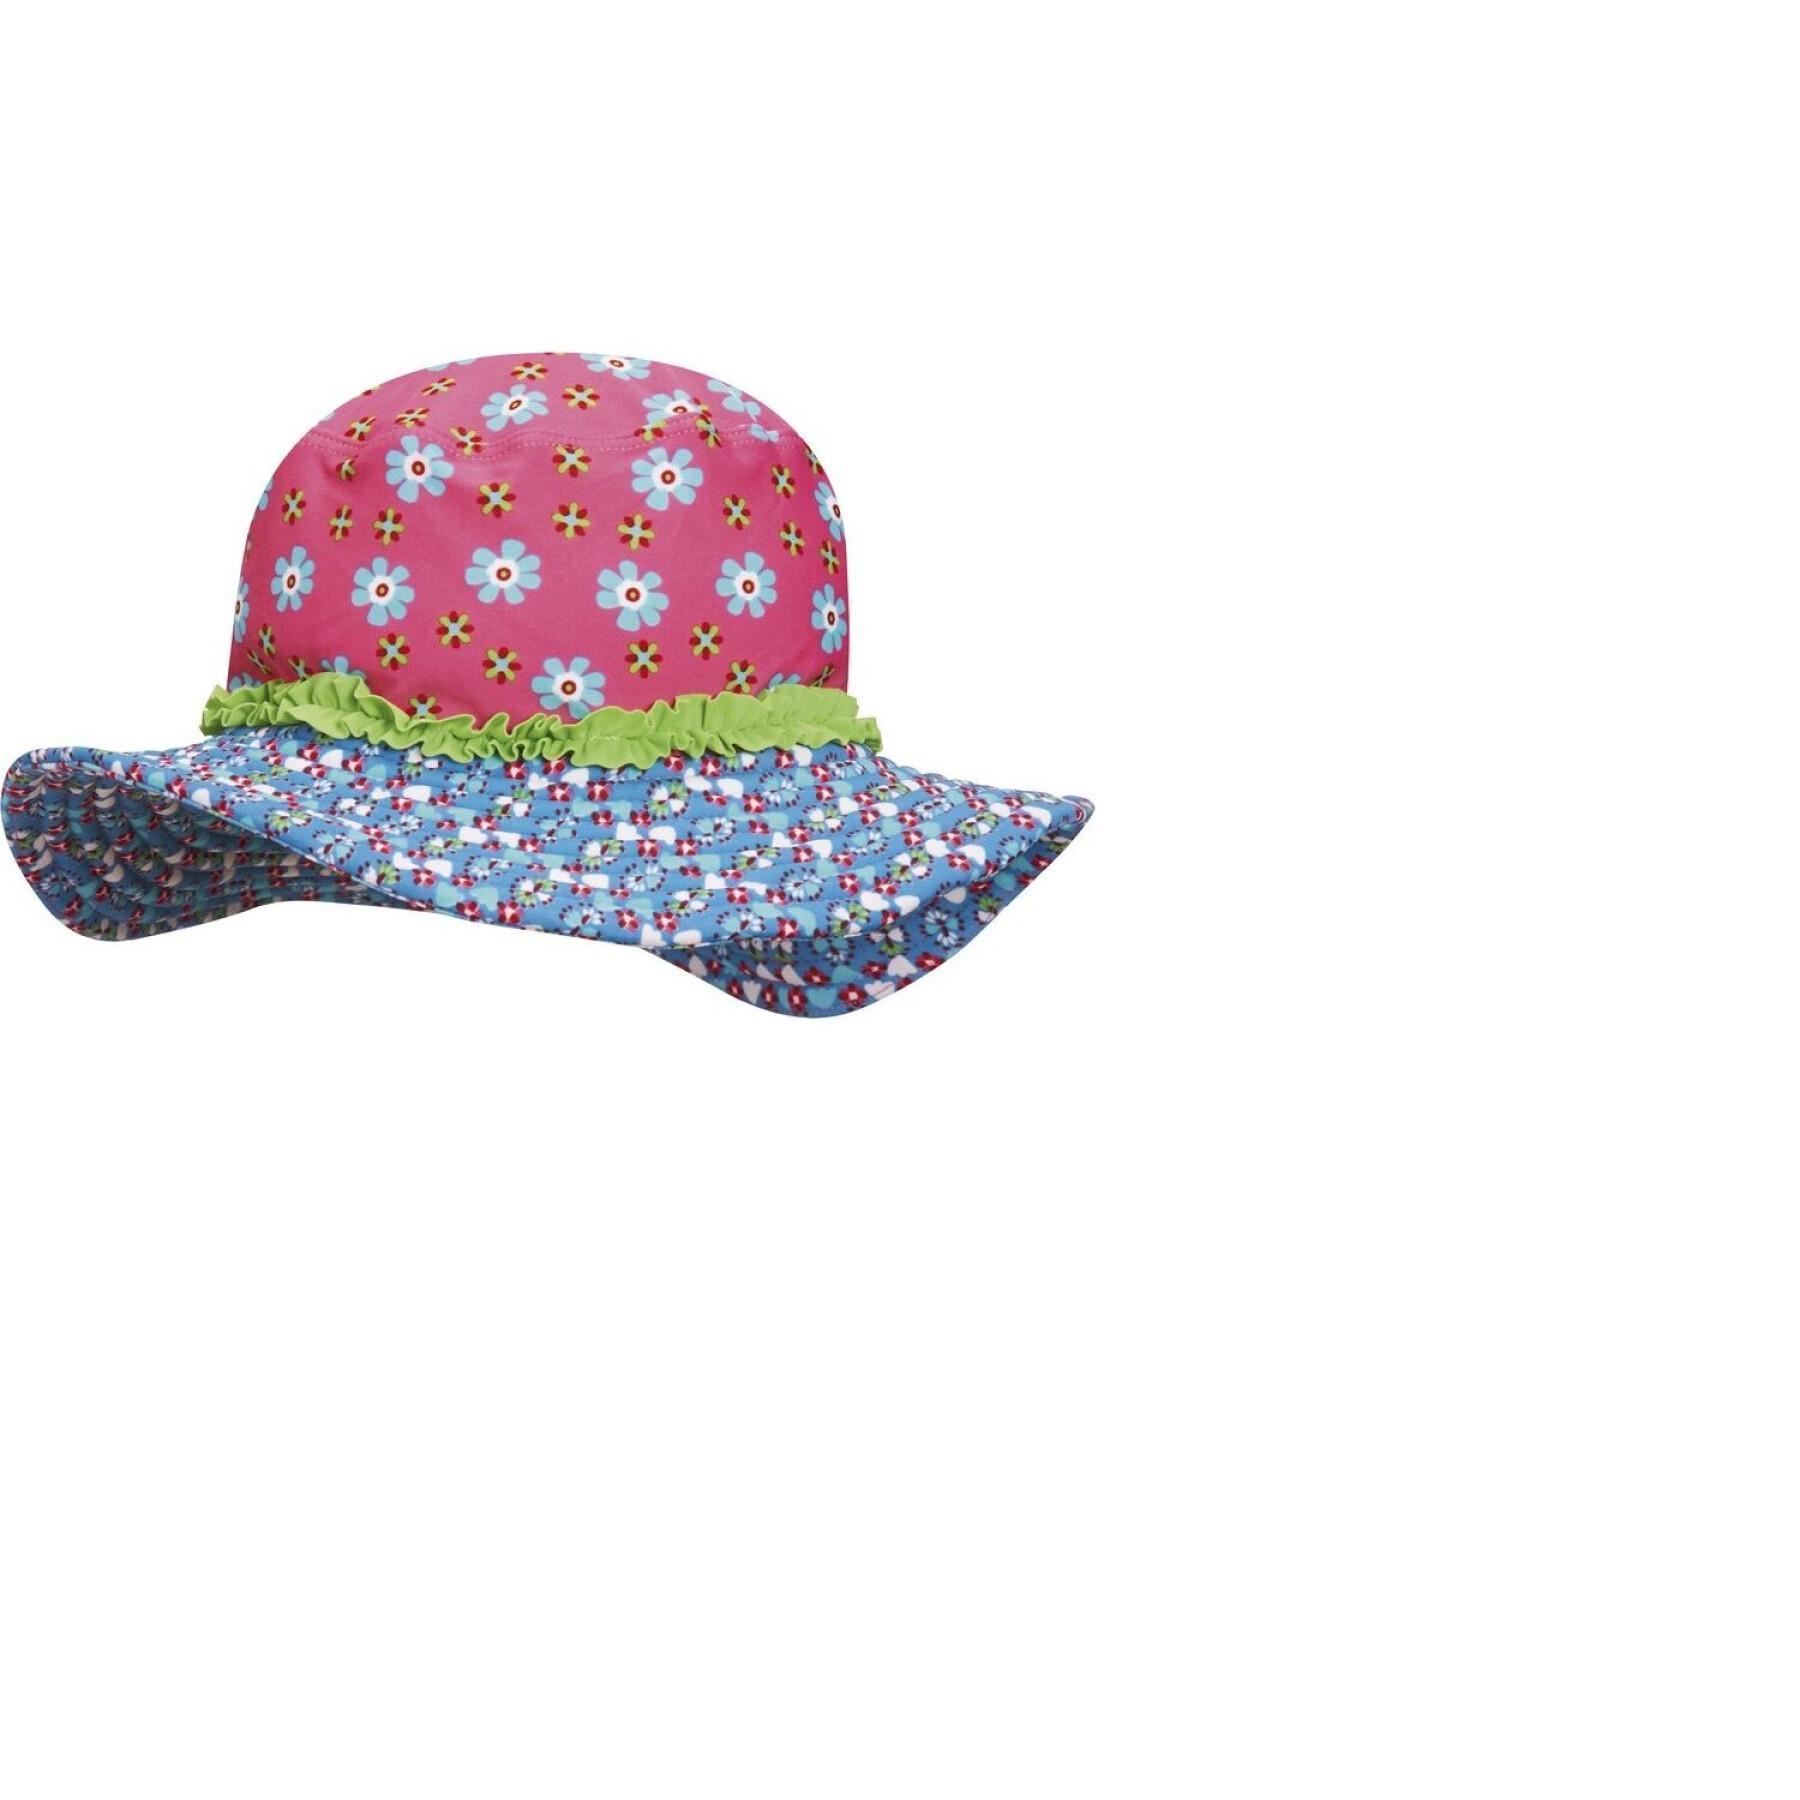 Bob with uv protection for girls Playshoes Flowers